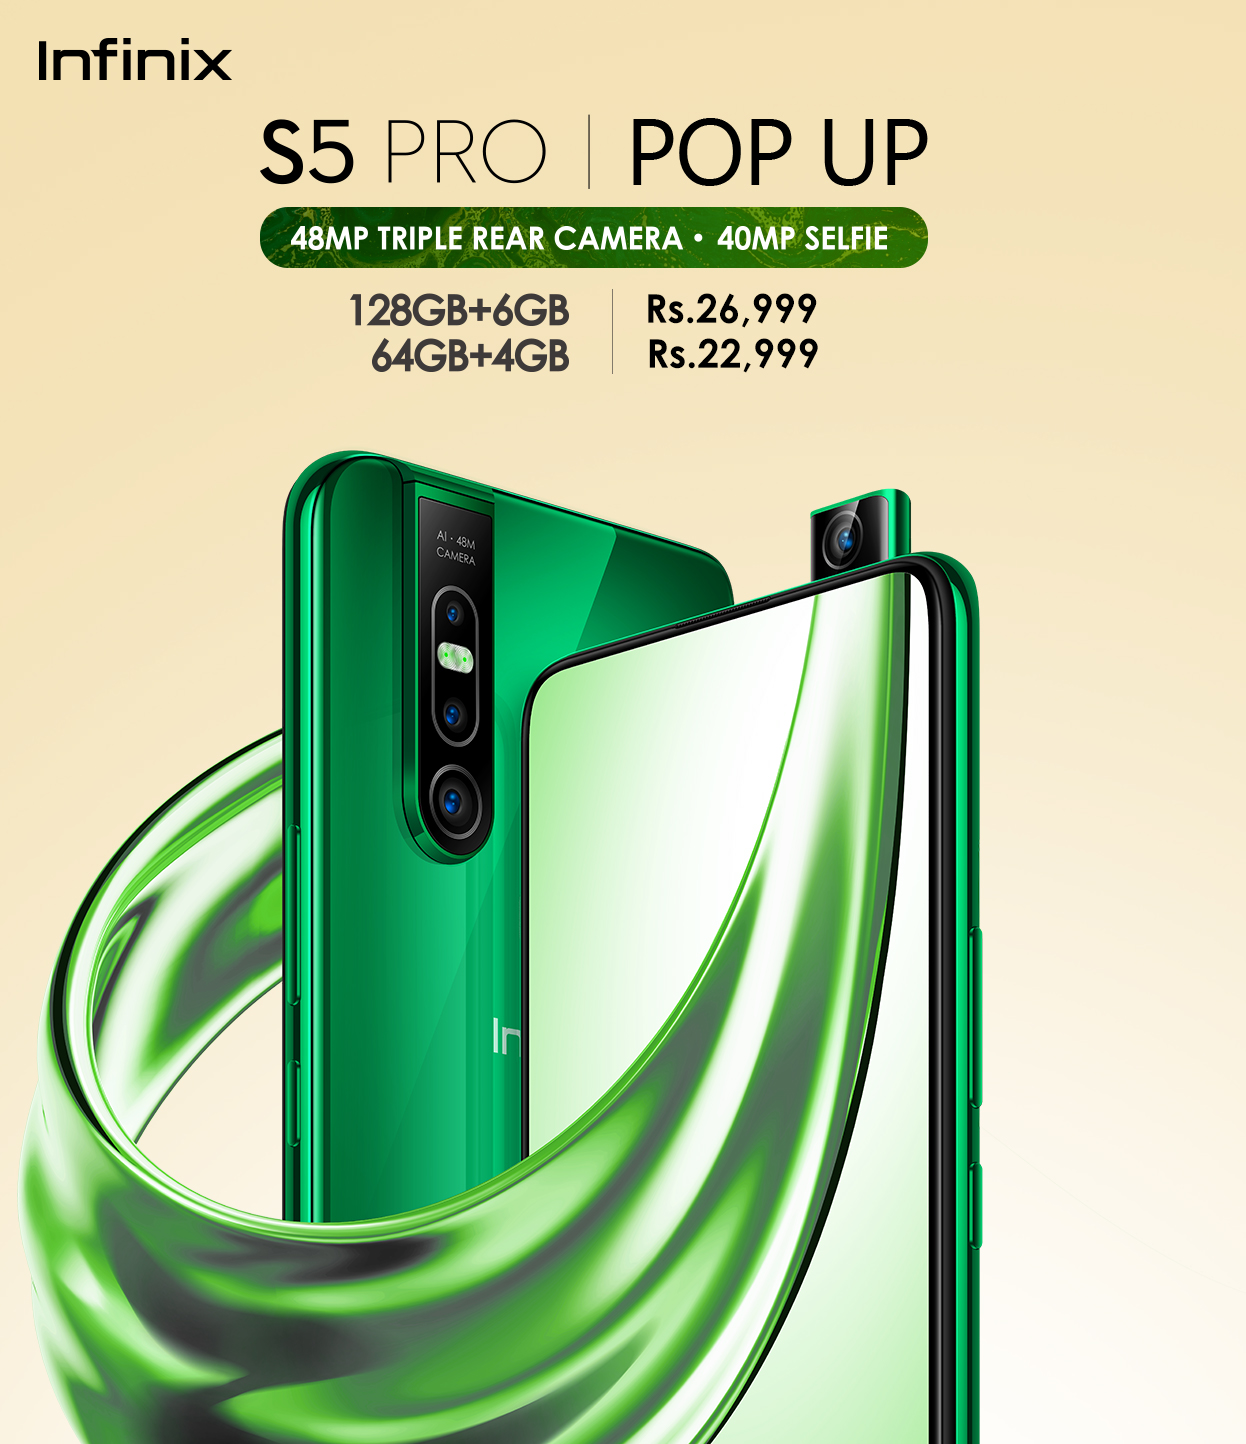 Infinix Officially Announced S5 Pro, 40MP Pop-up Selfie Camera Smartphone